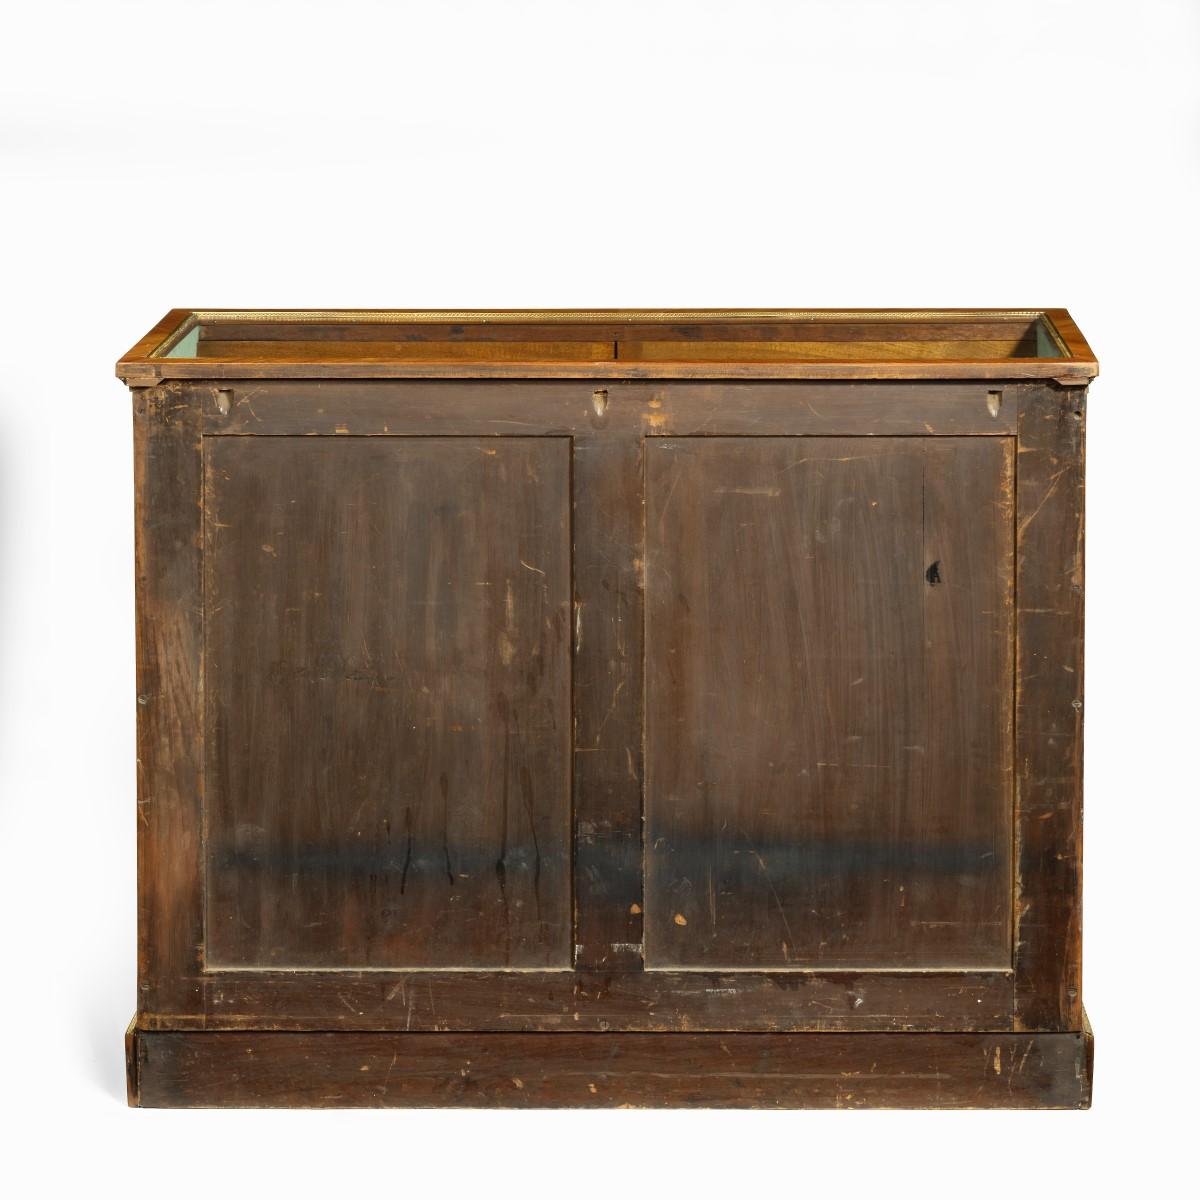 A Victorian kingwood display cabinet in French taste, of rectangular form with a glazed top and front doors enclosing a single glass shelf, decorated with herring-bone veneers and ormolu mounts. English, circa 1870.